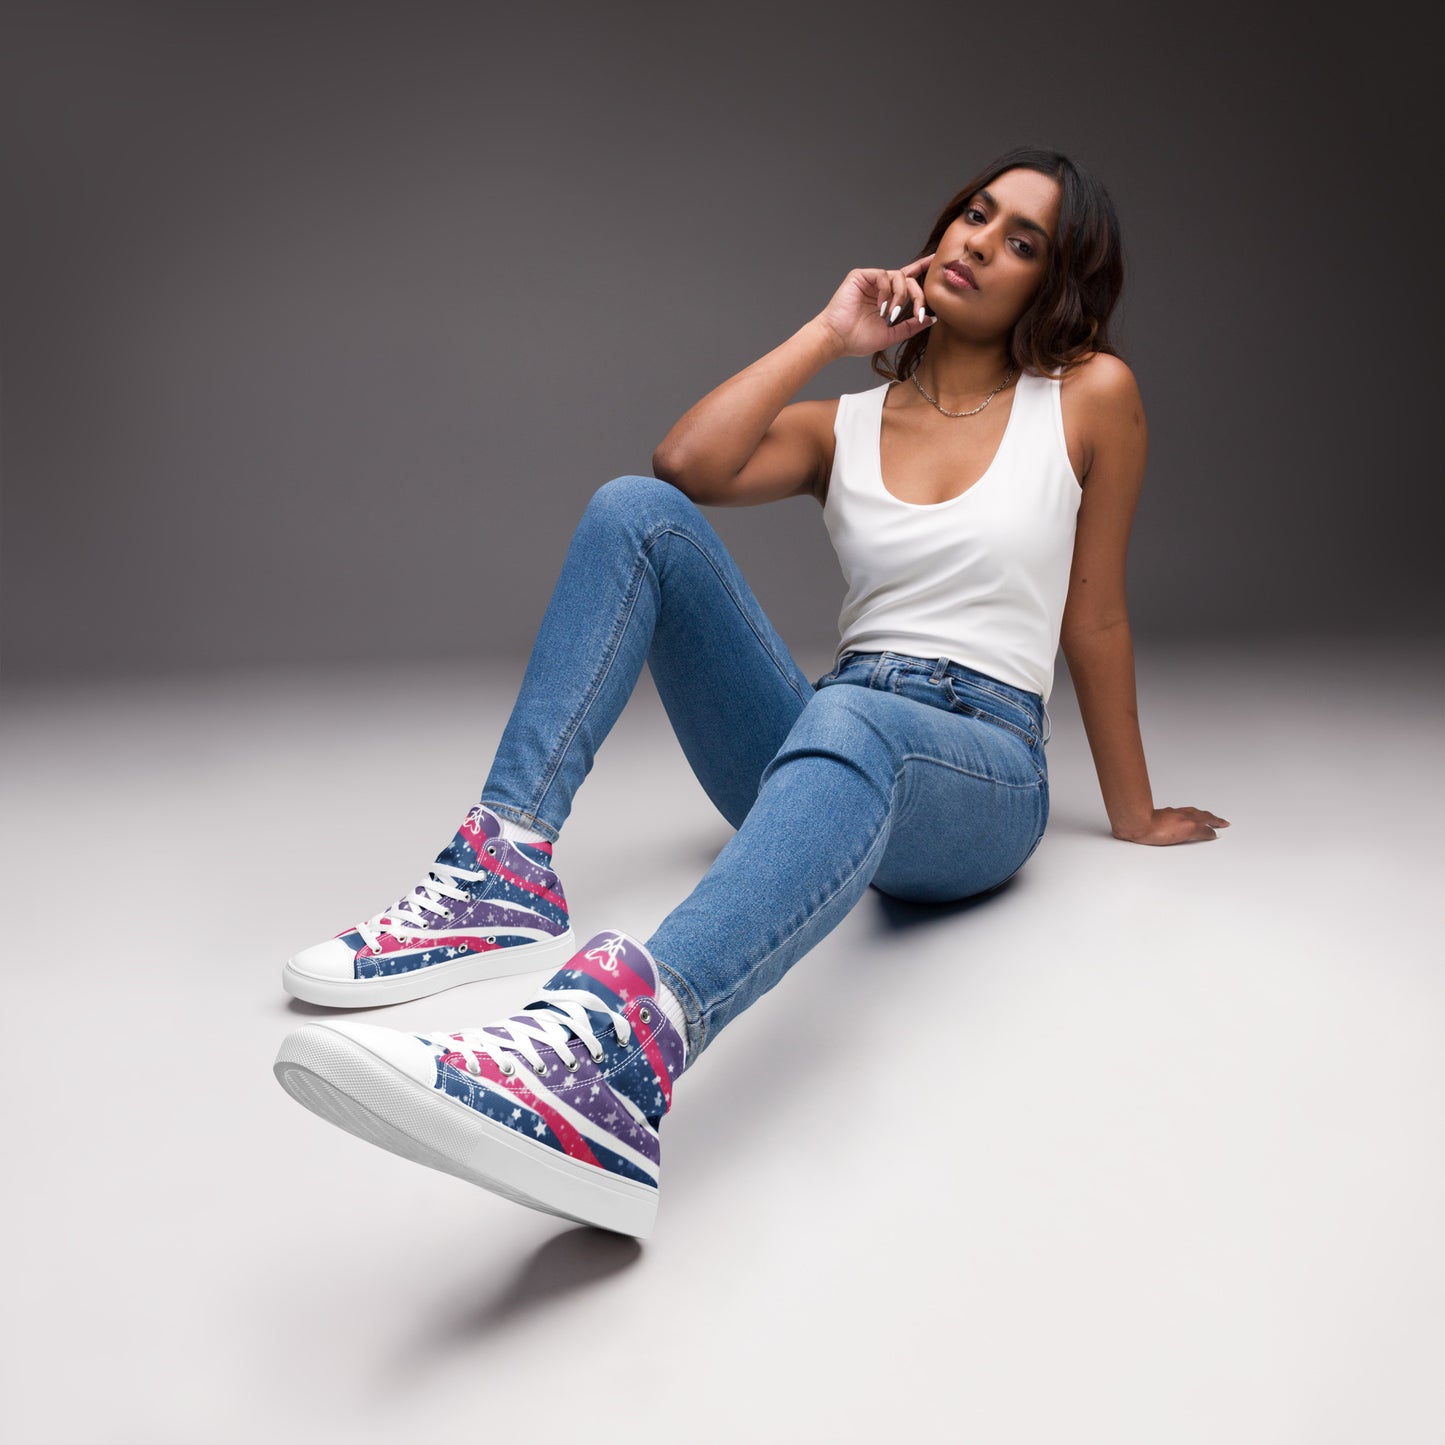 A model wears a pair of high top shoes with pink, purple, and blue ribbons that get larger from heel to laces, white stars, and the Aras Sivad logo on the tongue.